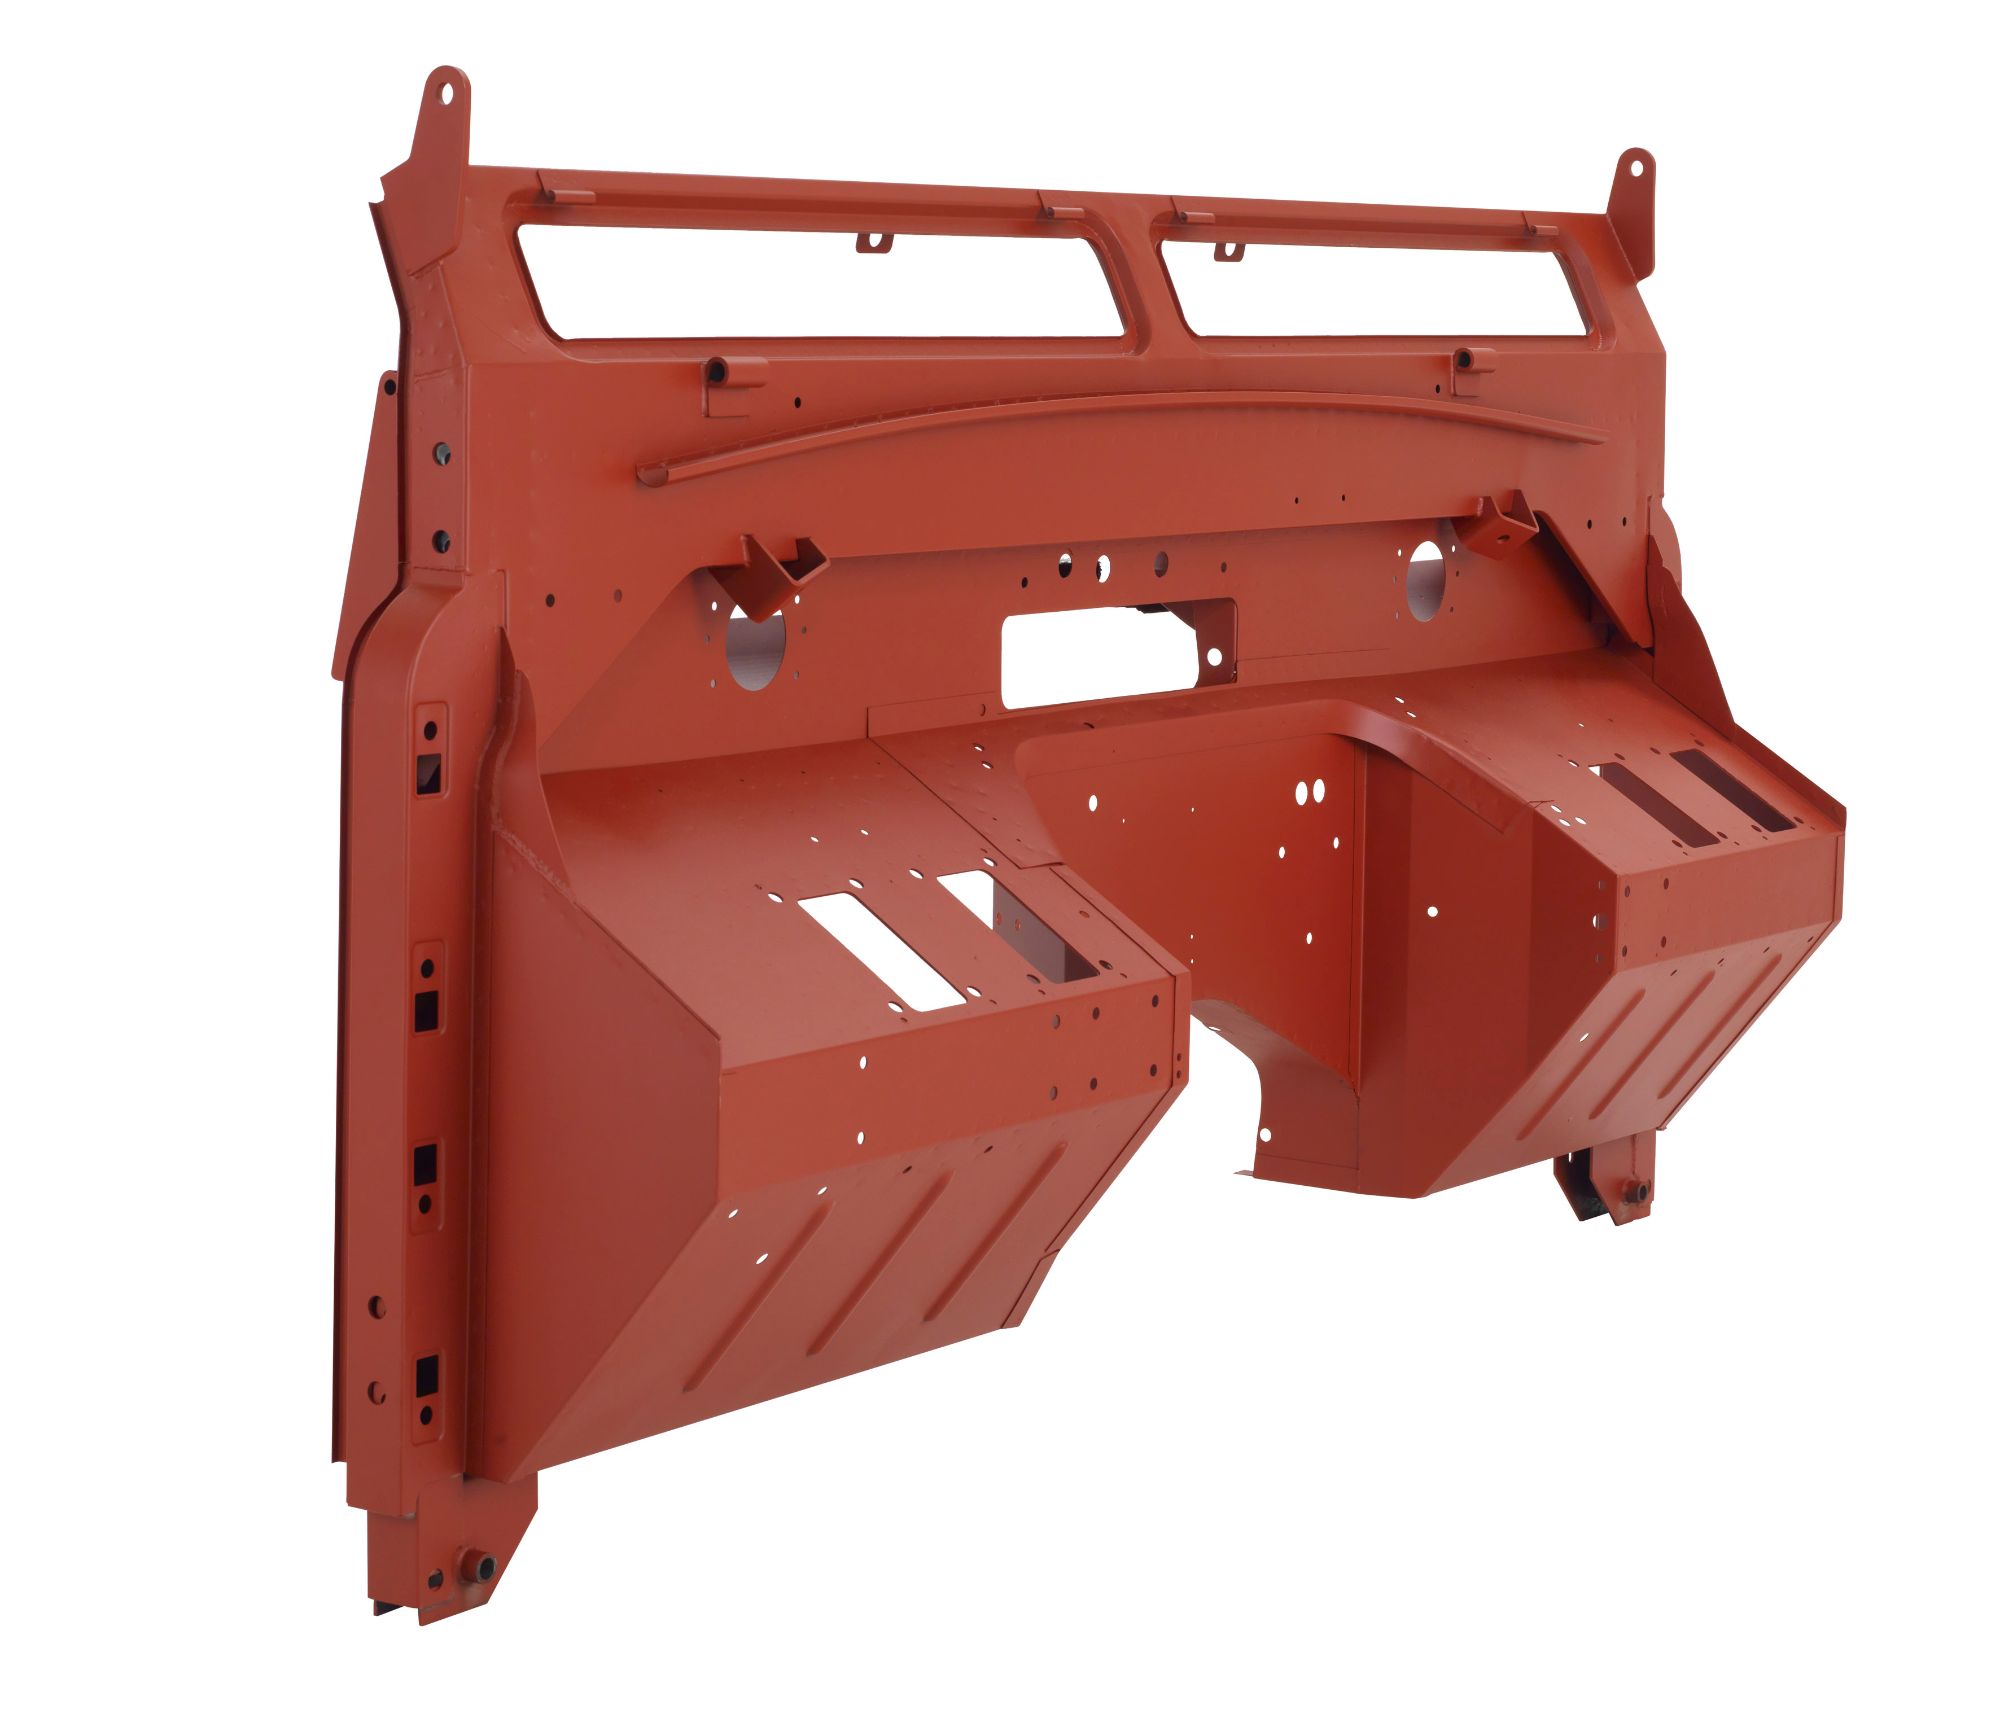 Pegasus Parts - Red Oxide - BH S2a Type 4 - Engine Side View Angle - 180118